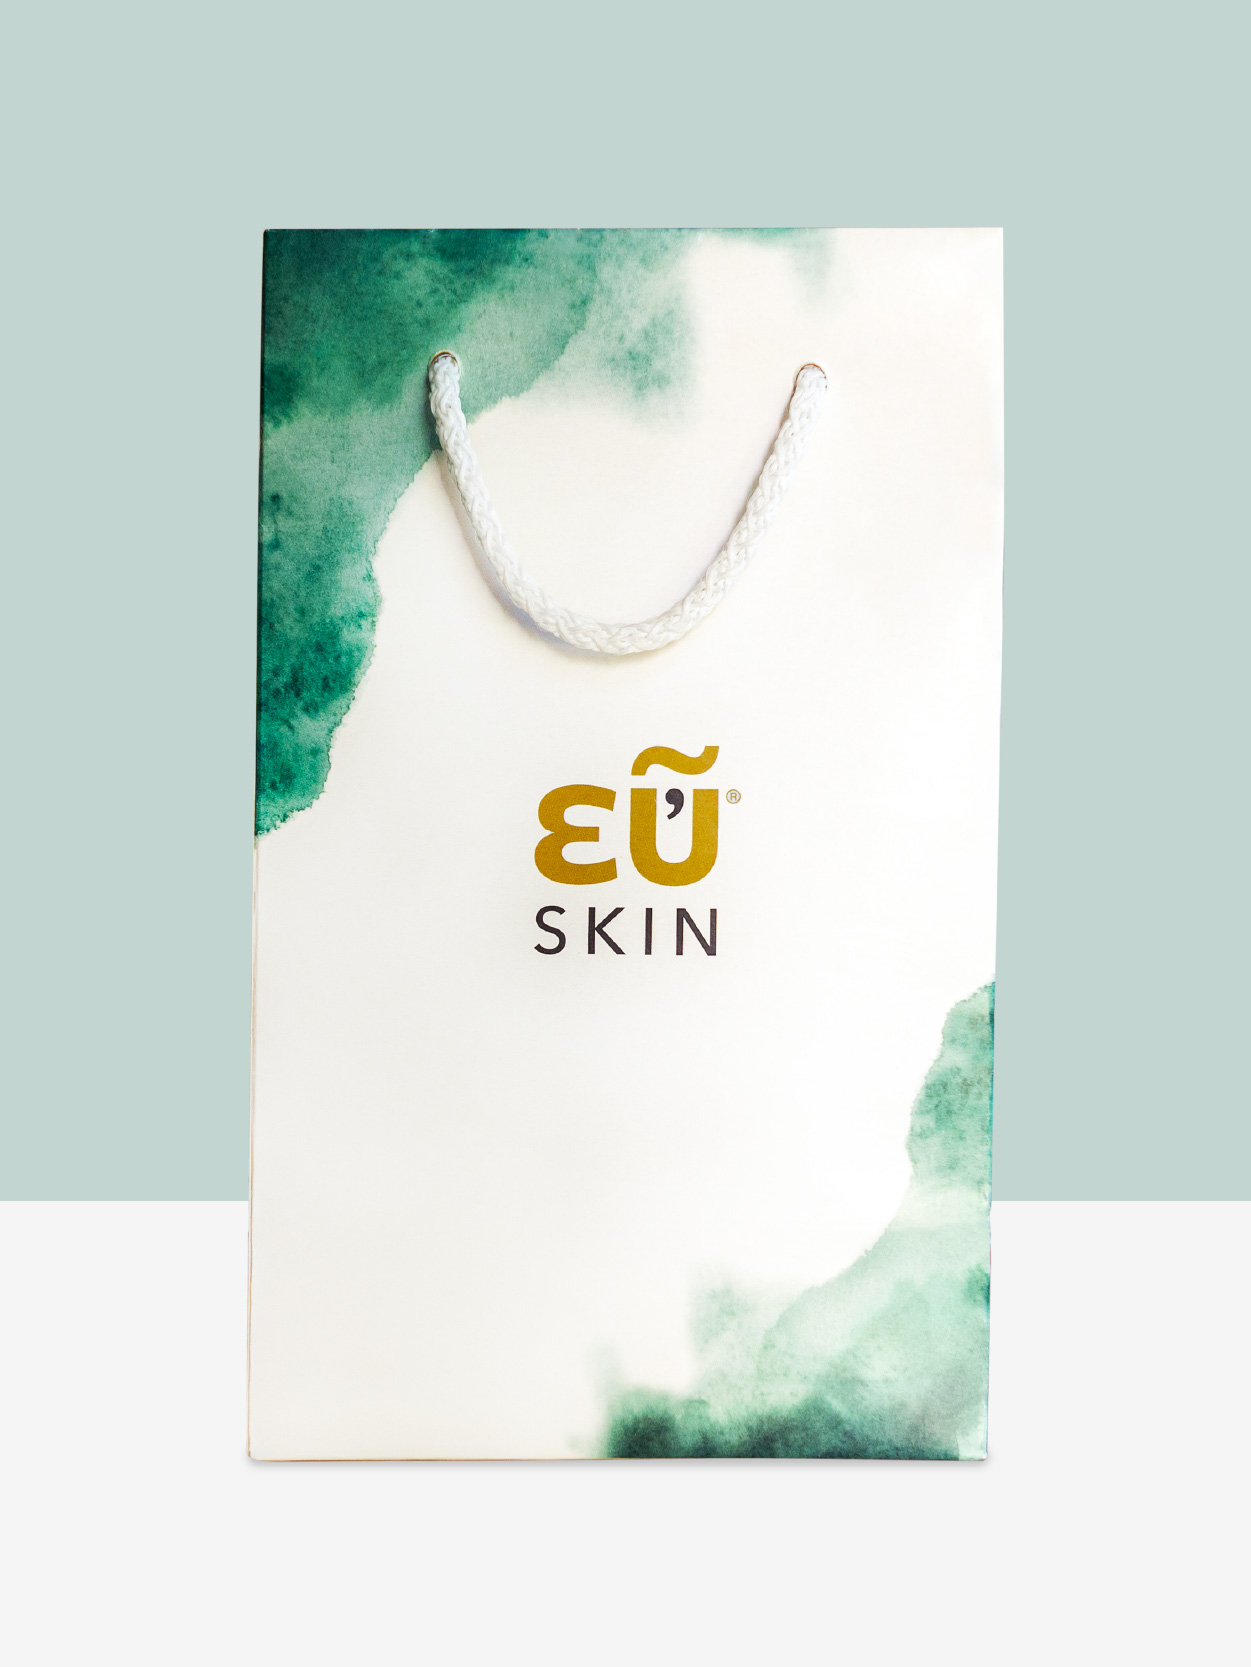 Personalized packages ~ euskin products